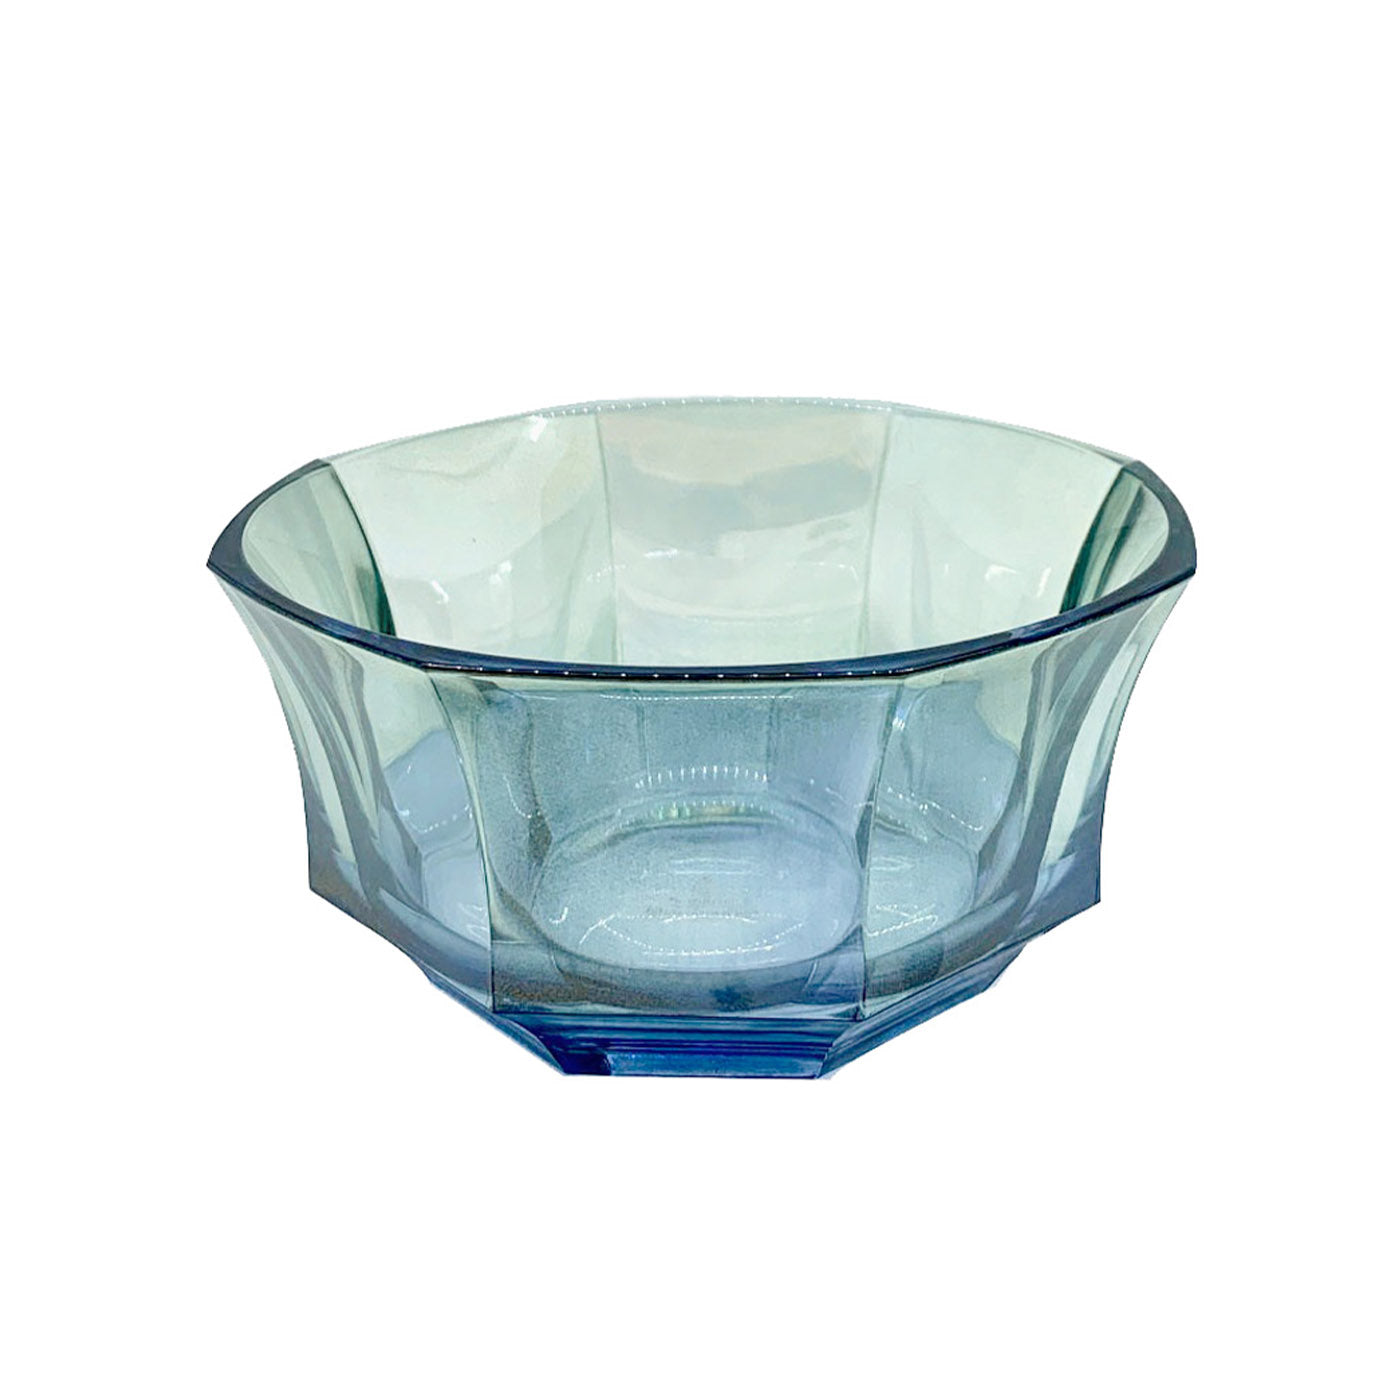 Faceted Blue-To-Green Crystal Dessert Bowl - Alternative view 1